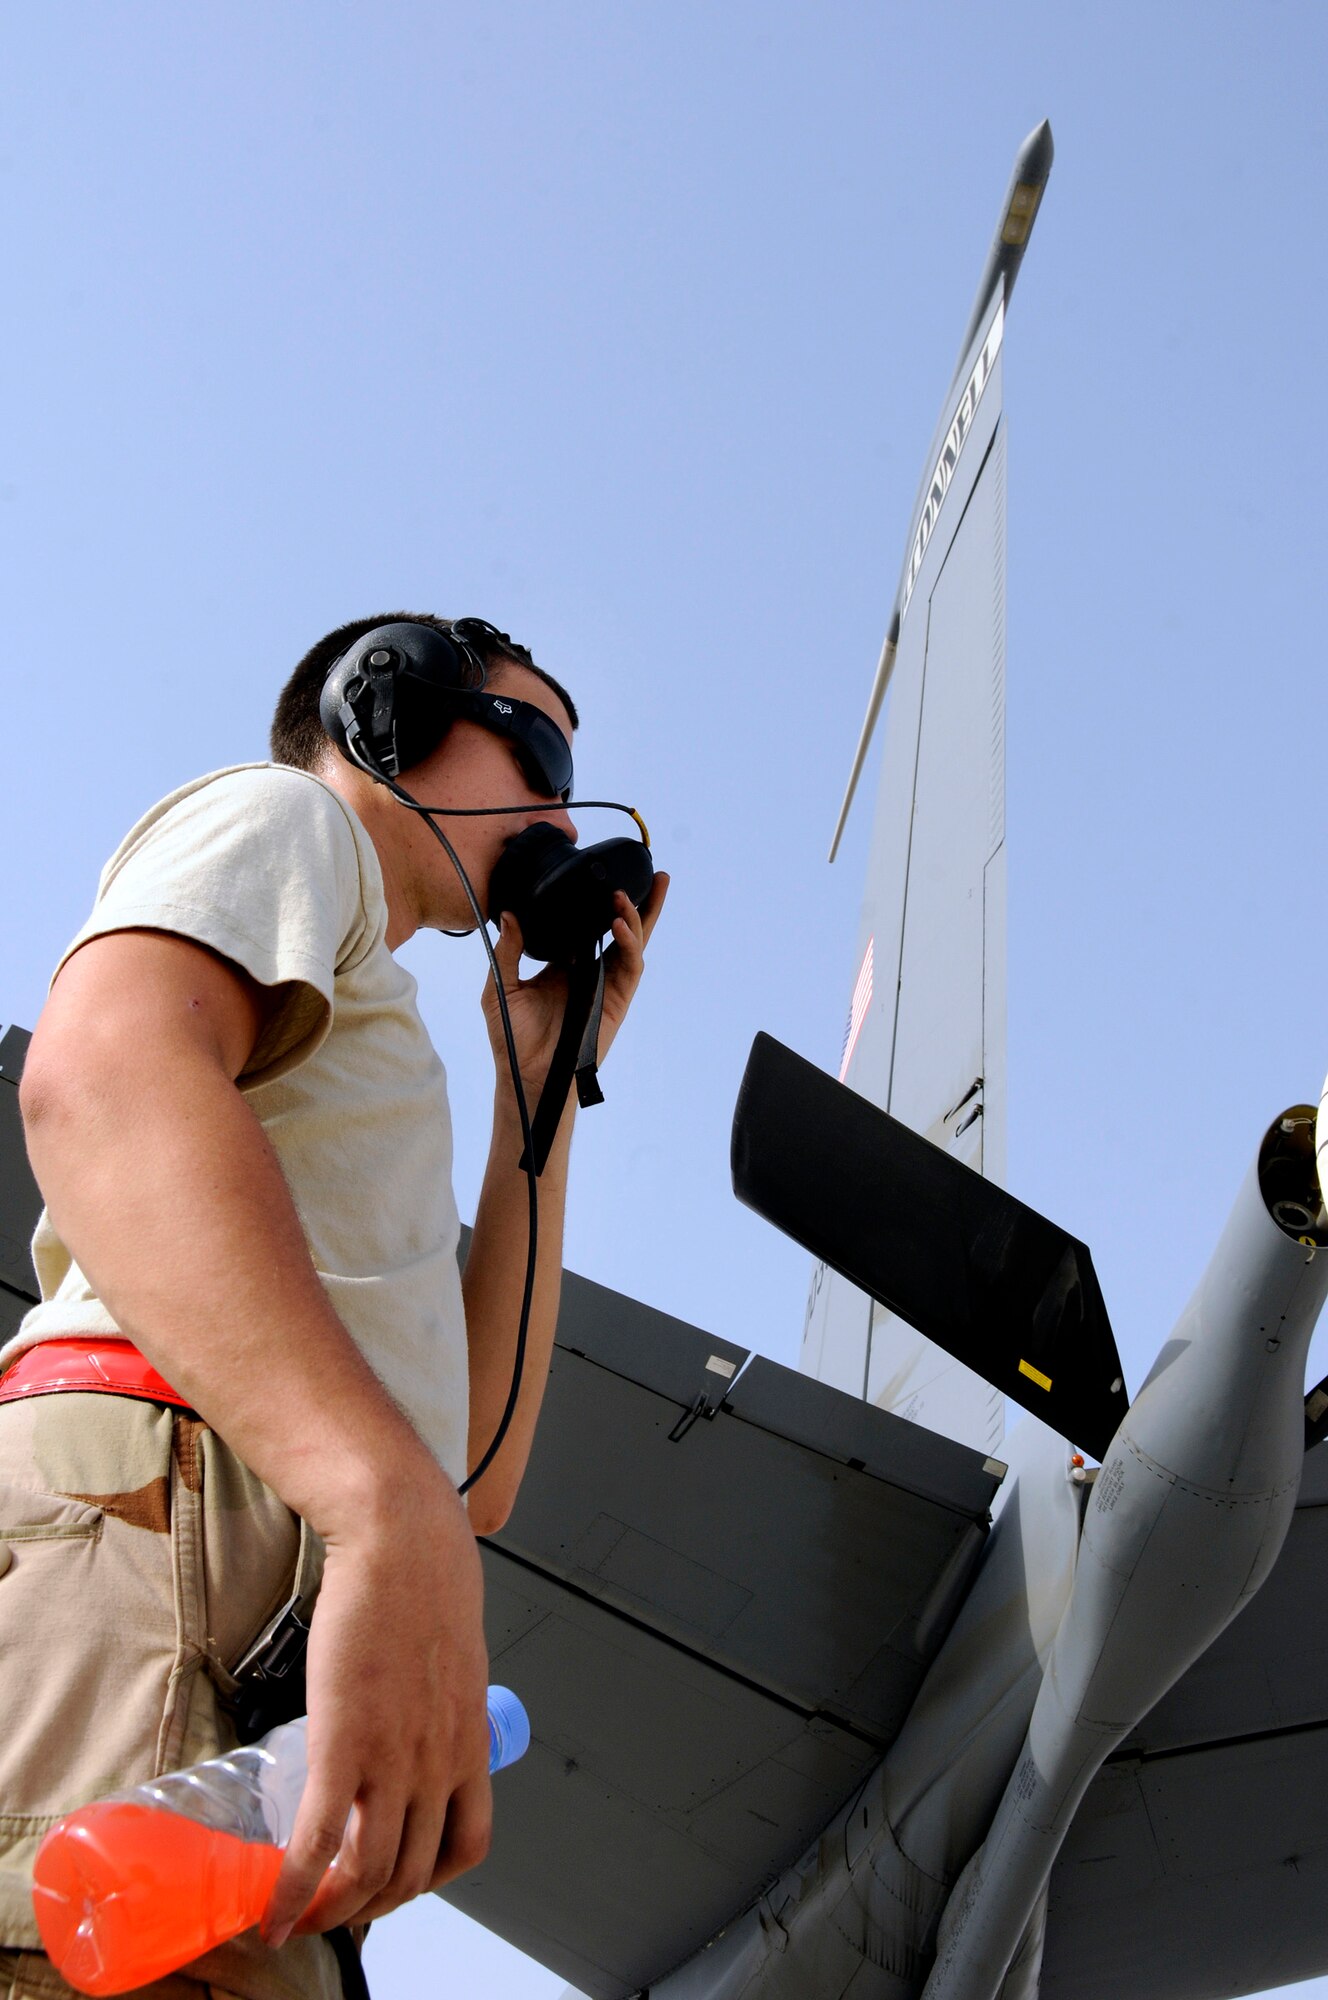 Airman 1st Class Jason Somrak, 379th Expeditionary Aircraft Maintenance Squadron, 340th Aircraft Maintenance Unit, communicates a positive response to flap and stabilizer checks on a KC-135 Stratotanker from the 22nd Air Refueling Wing, McConnell Air Force Base, Kan., as part of pre-flight procedures Sept.9, 2008.  The pre-flight checklist is accomplished before the KC-135 taxies off to start its mission from an undisclosed air base in Southwest Asia.  The KC-135 provides aerial refueling support to Air Force, Navy, Marine Corps and allied nation aircraft engaged in Operations Iraqi and Enduring Freedom and Joint Task Force-Horn of Africa. Airman Somrak, a native of Colfax, La., is deployed from McConnell AFB, Kan. (U.S. Air Force photo by Tech. Sgt. Michael Boquette/Released)